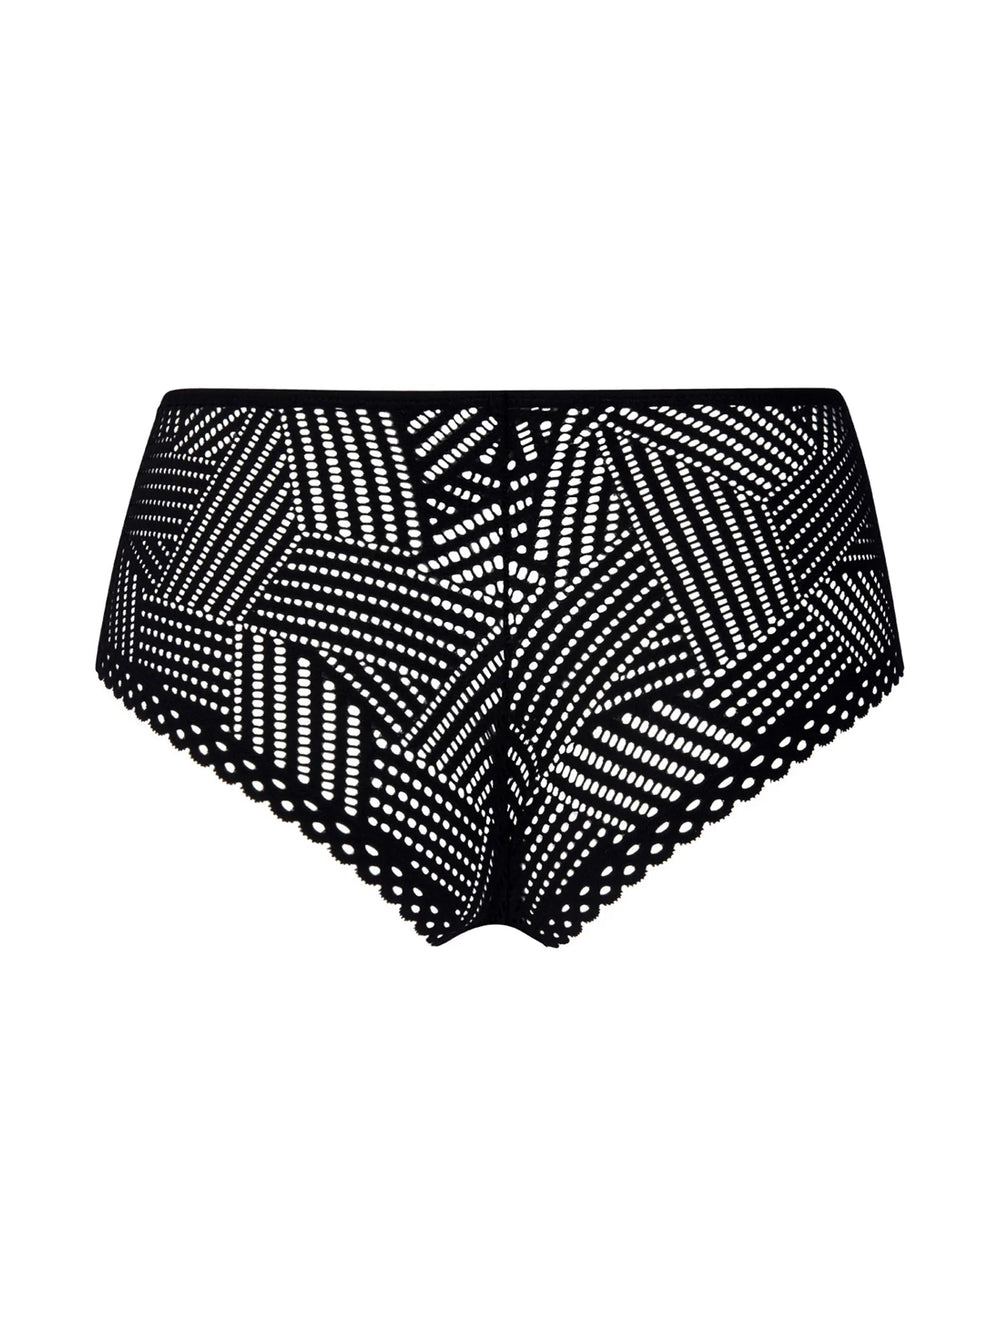 Antigel By Lise Charmel Tressage Graphic Boyshort - Tressage Noir Shorty Antigel by Lise Charmel